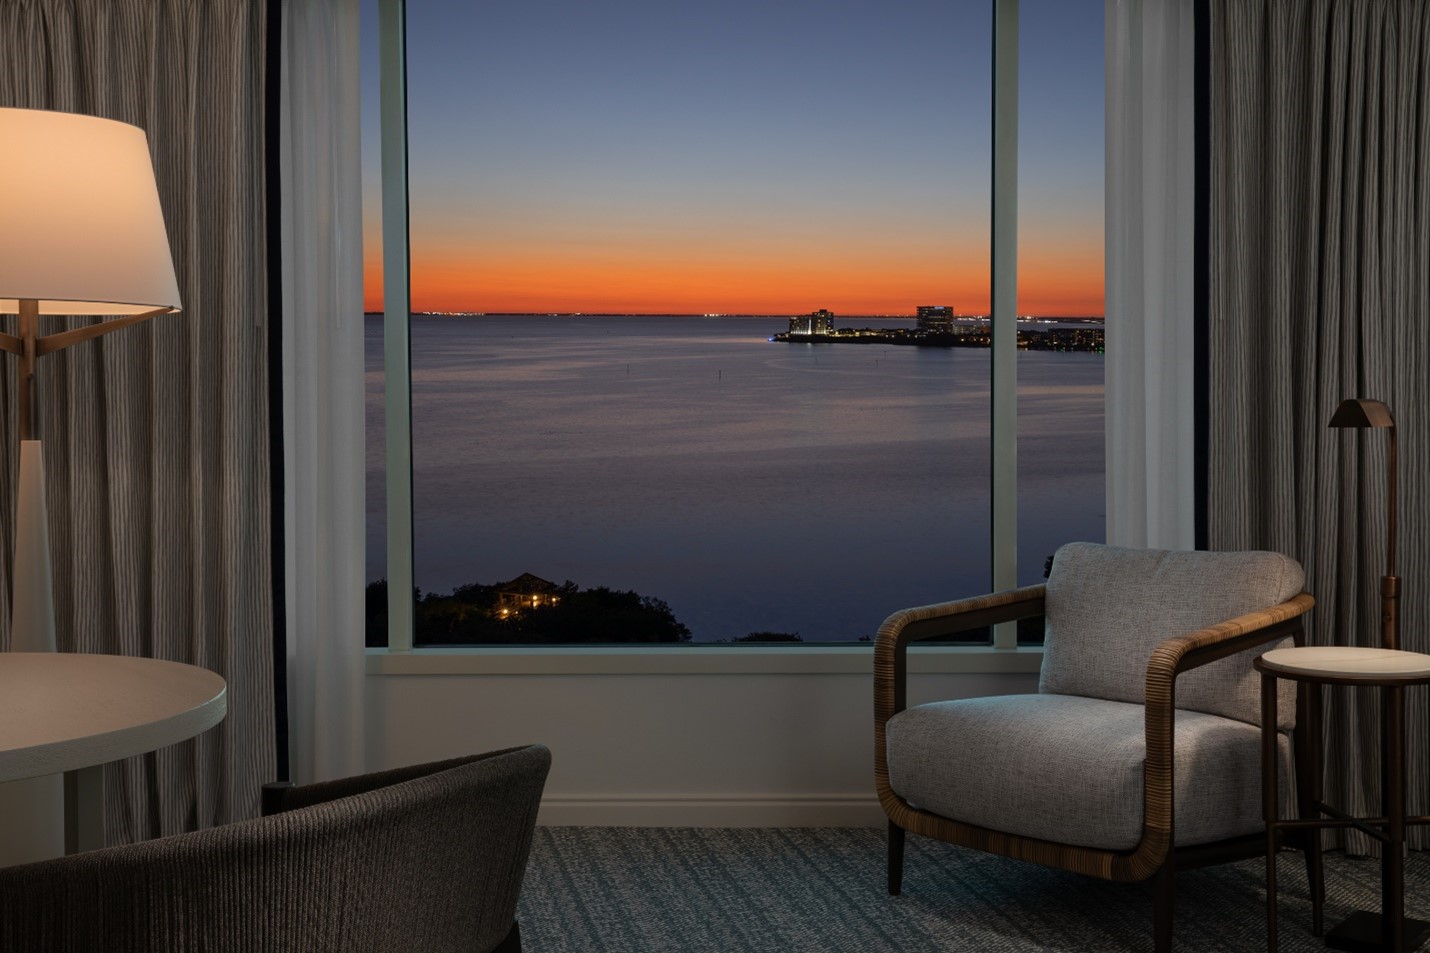 view of the ocean from a guest room at grand hyatt tampa bay